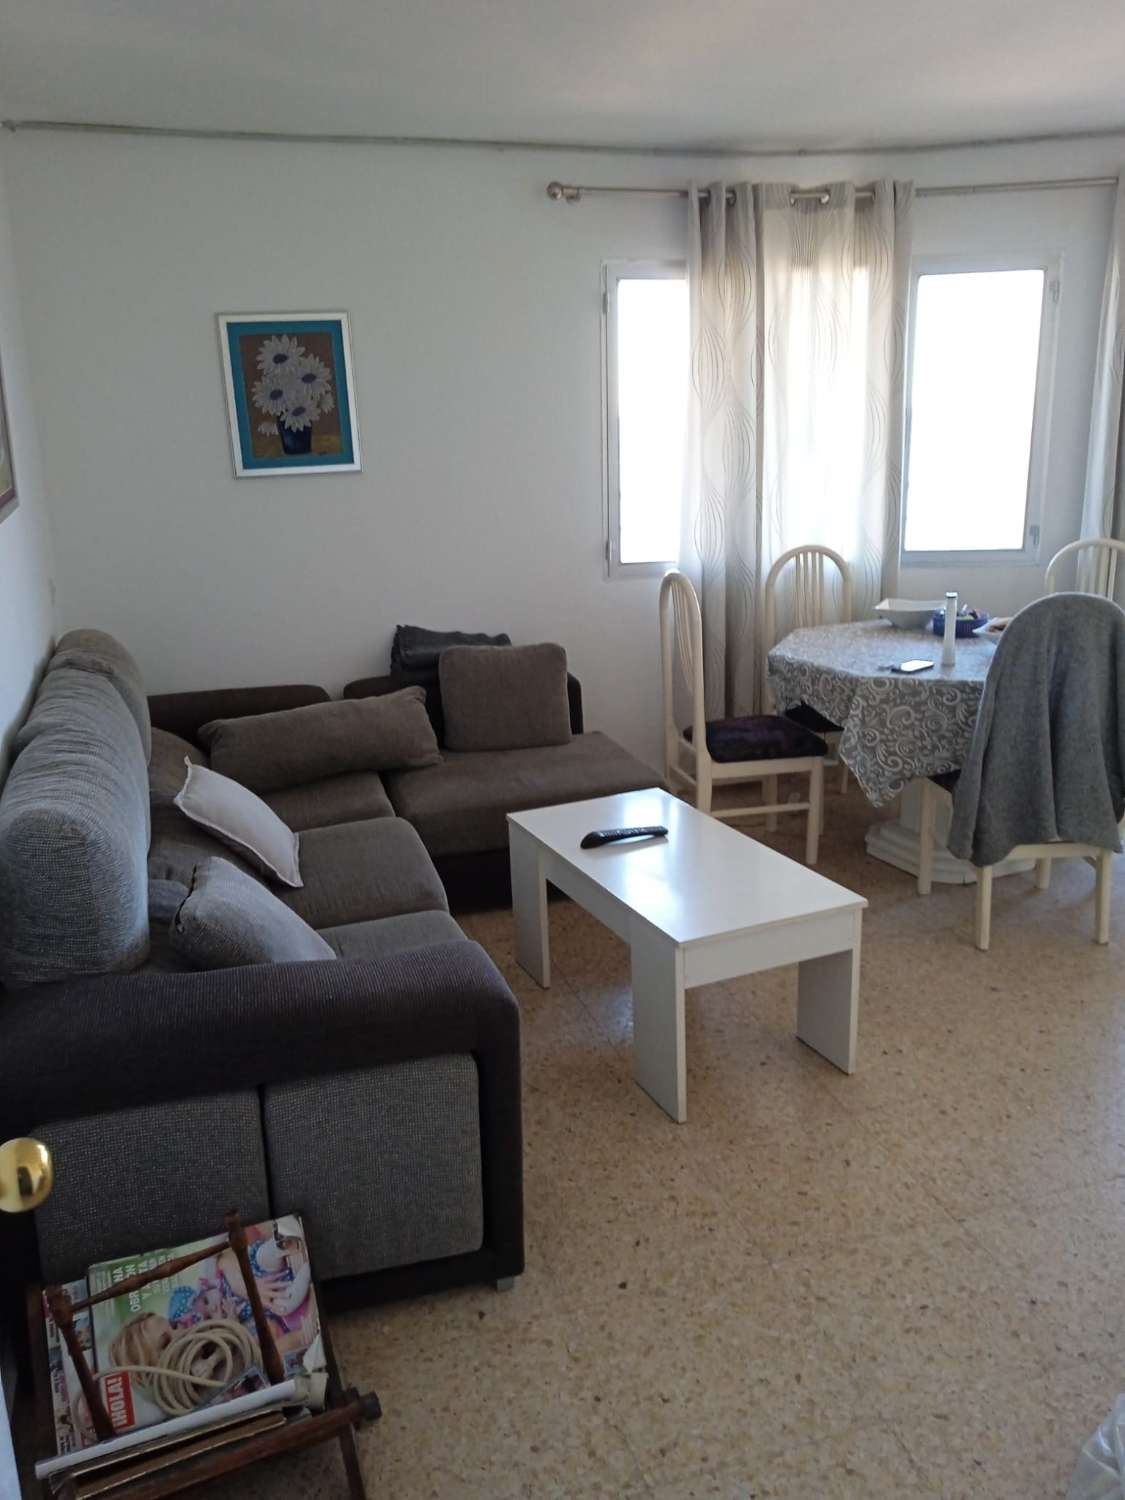 MID-SEASON. FOR RENT FROM 1.9.24-30-6-25 NICE APARTMENT WITH SEA VIEWS IN CARVAJAL AREA (FUENGIROLA)